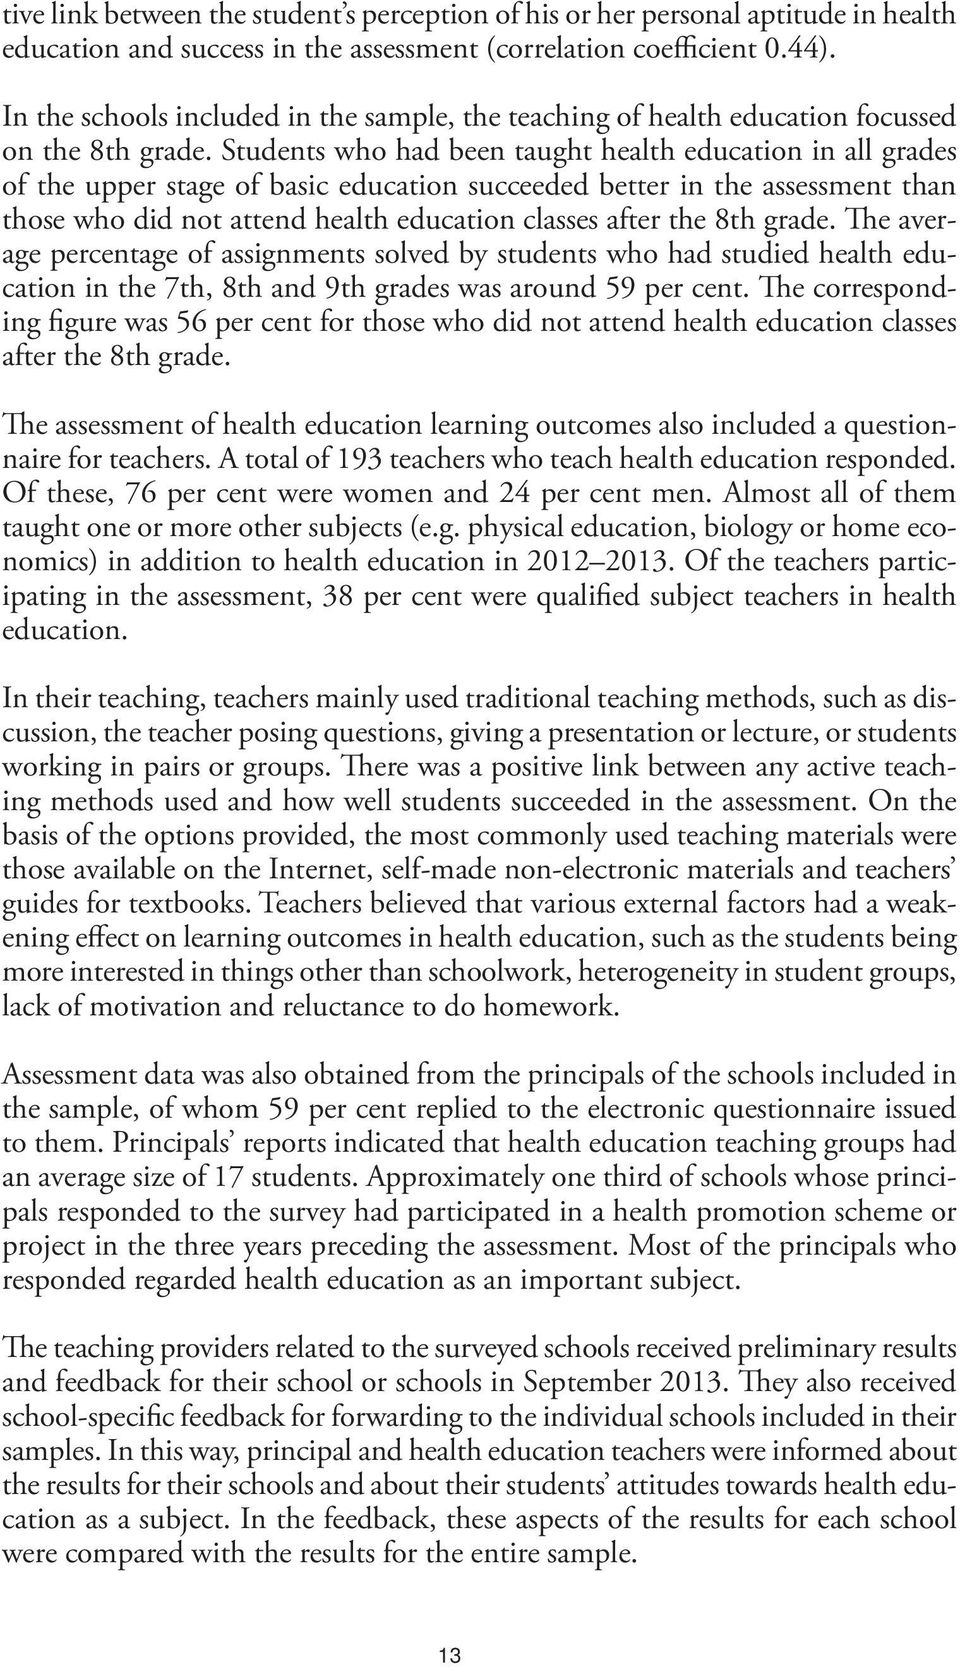 Students who had been taught health education in all grades of the upper stage of basic education succeeded better in the assessment than those who did not attend health education classes after the